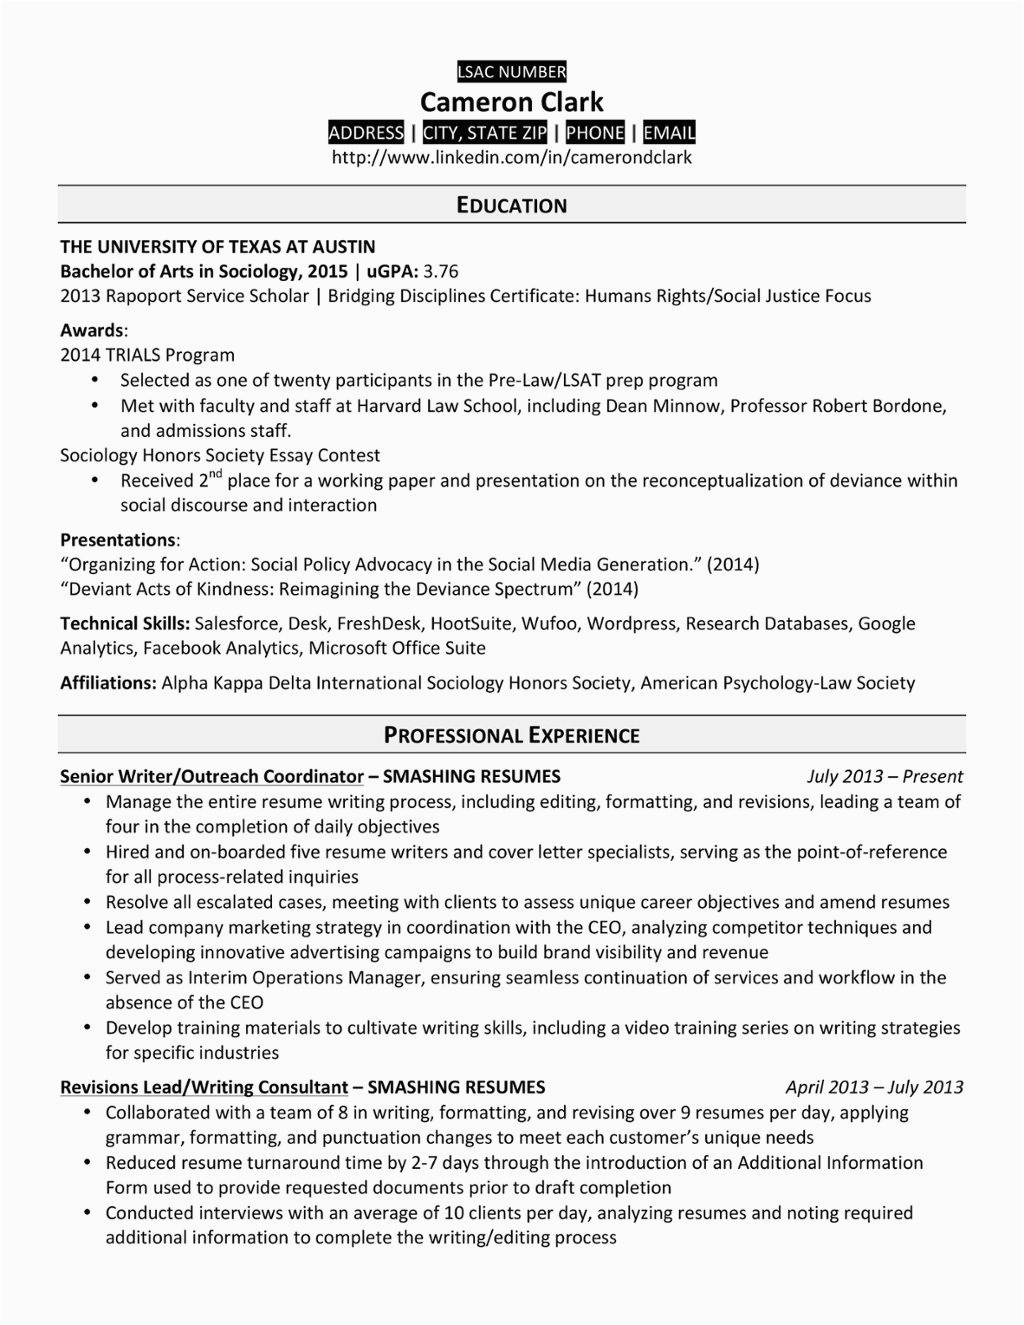 Sample Resumes for Law School Graduates This Resume Of A Successful Harvard Law School Applicant Highlights His